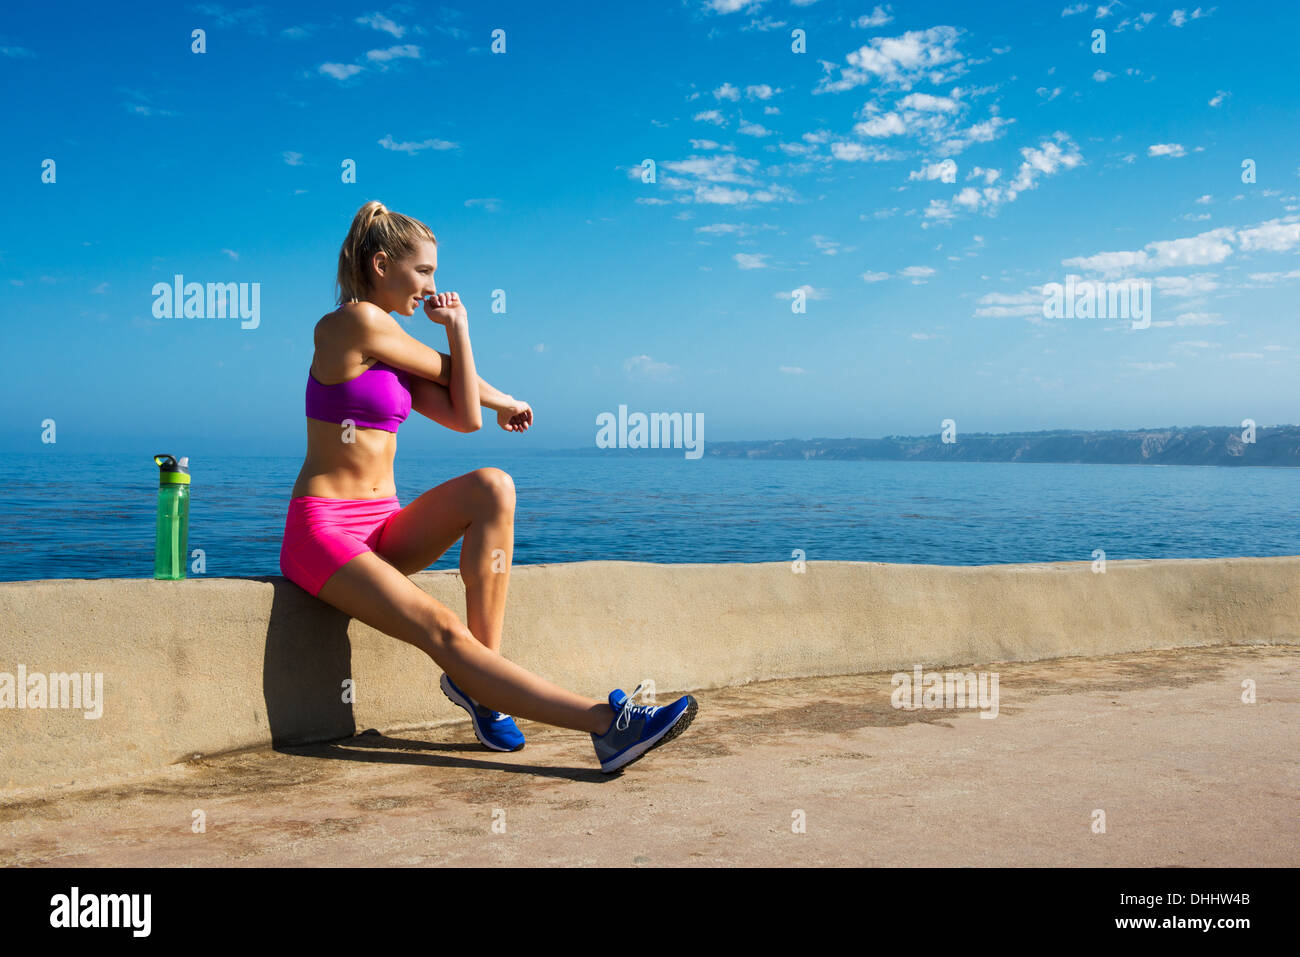 Woman stretching at coast Banque D'Images